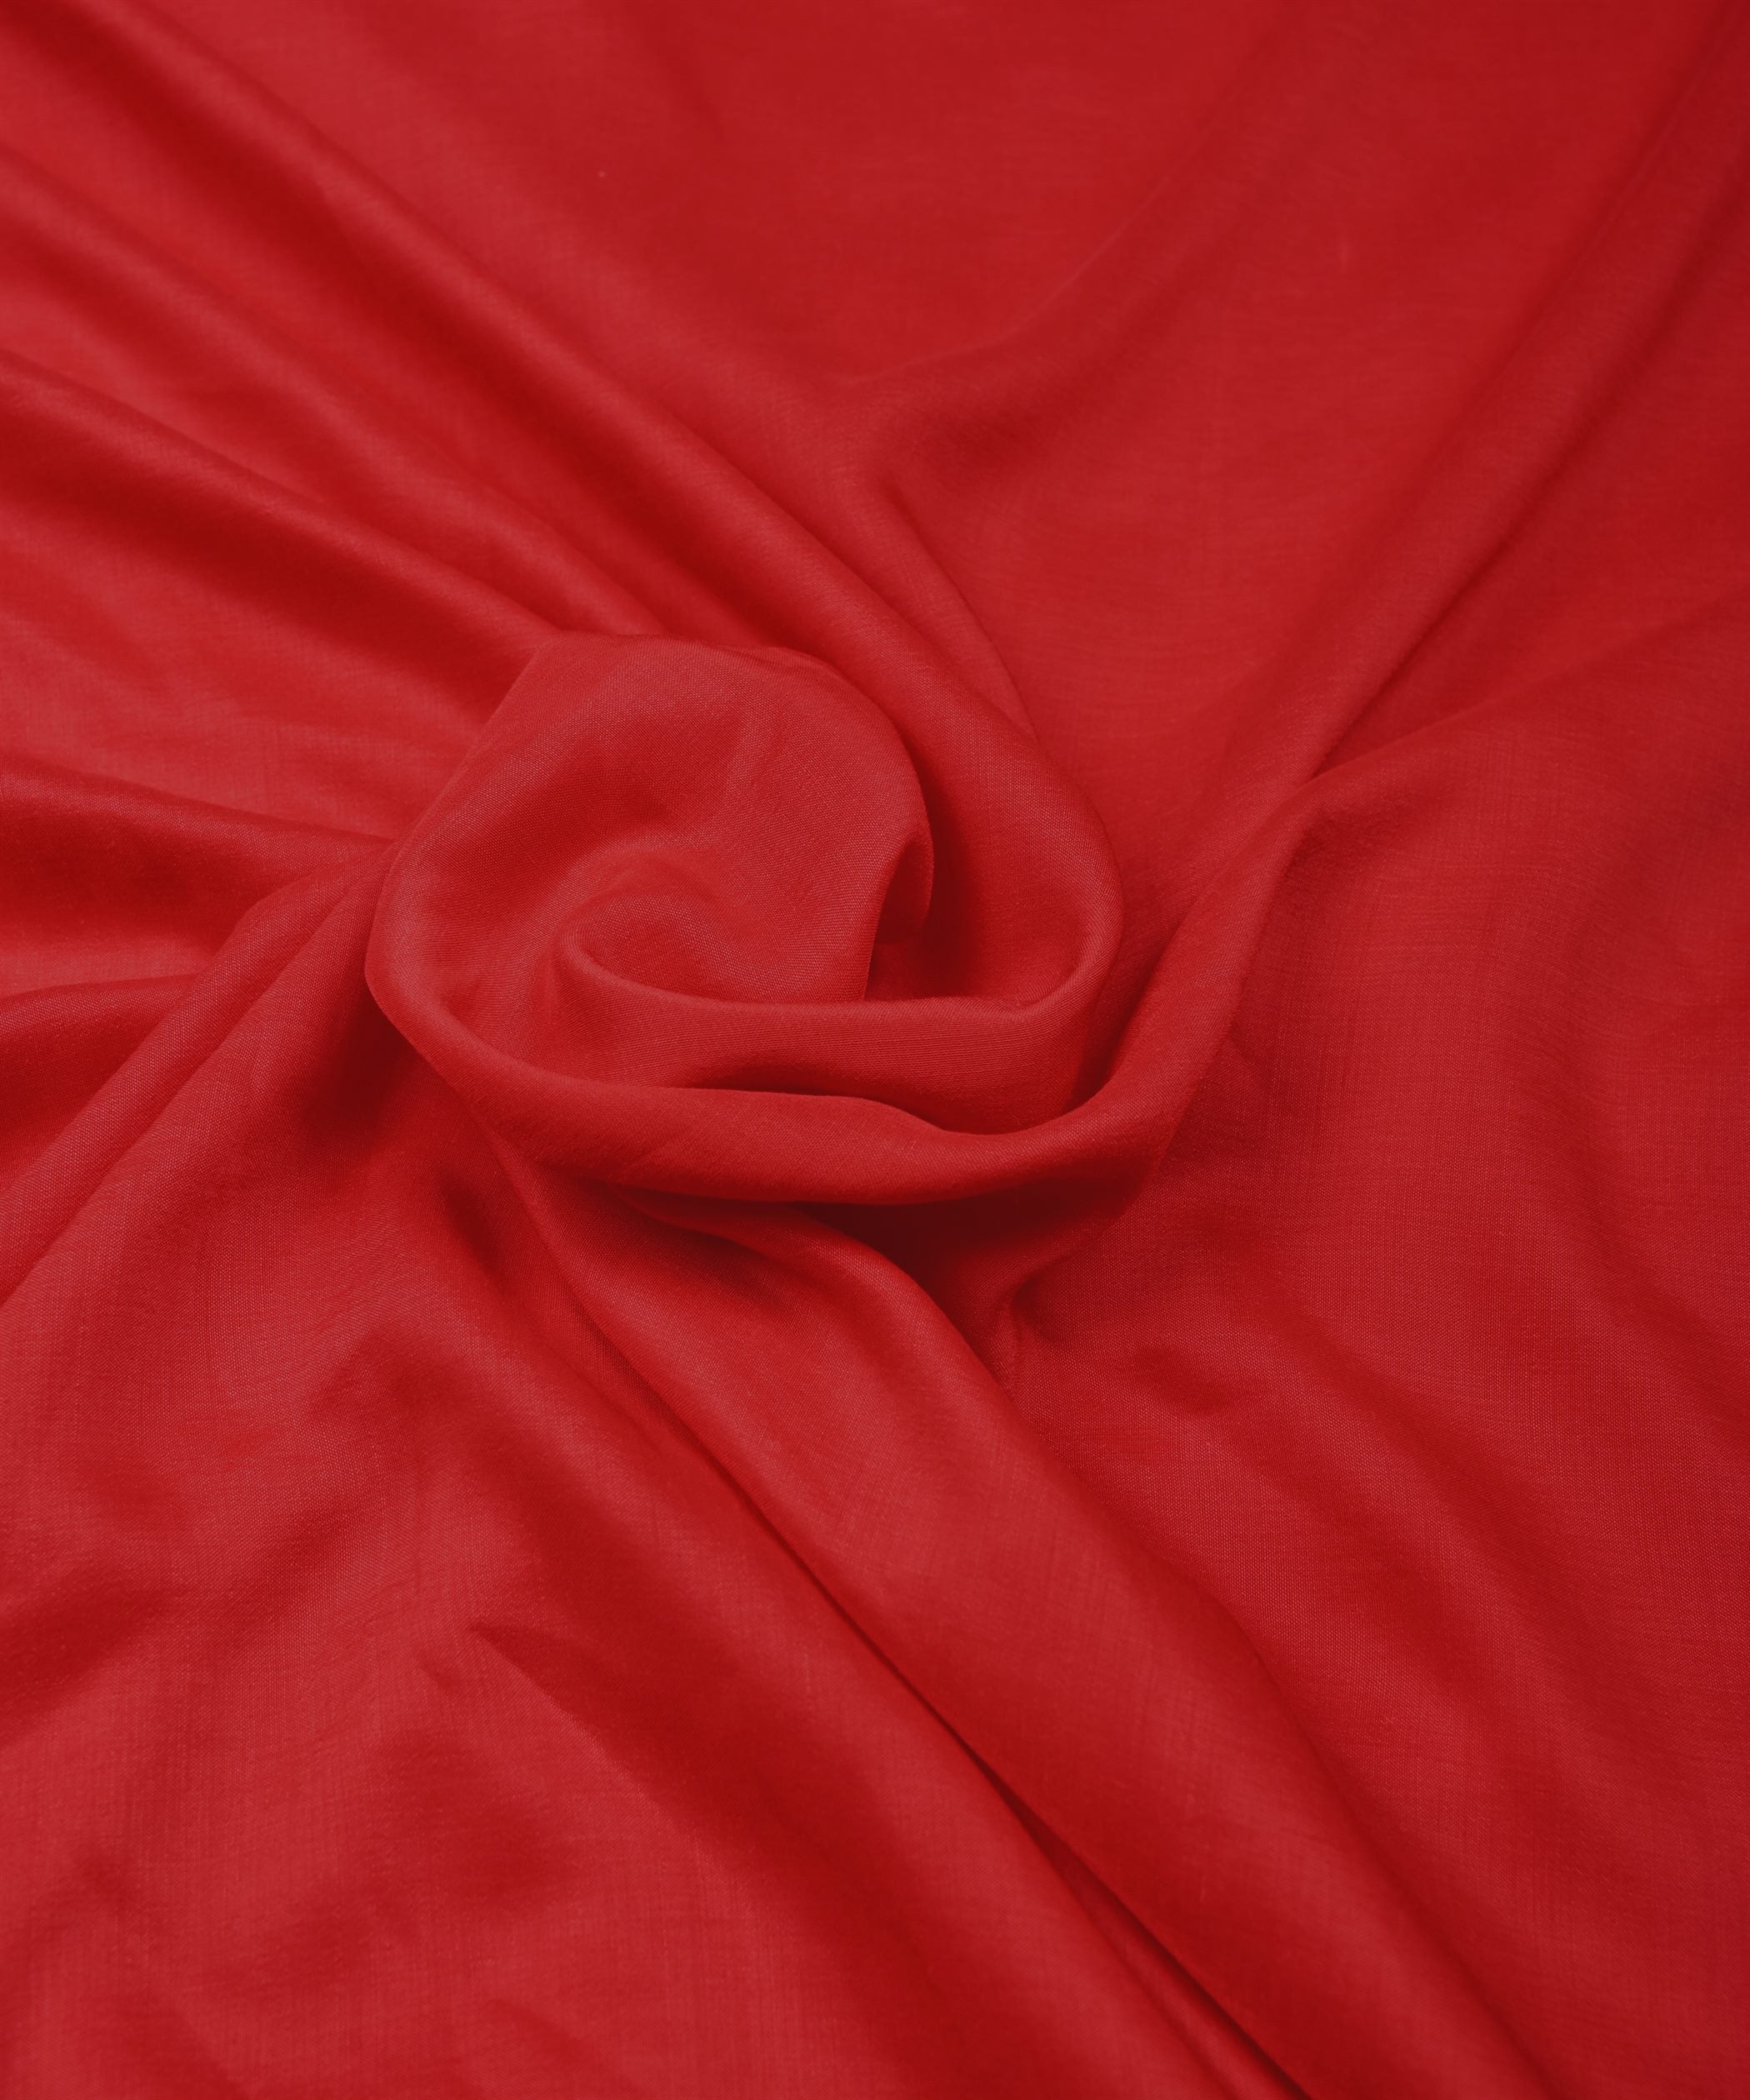 Blood Red Plain Dyed Polyester Muslin Fabric